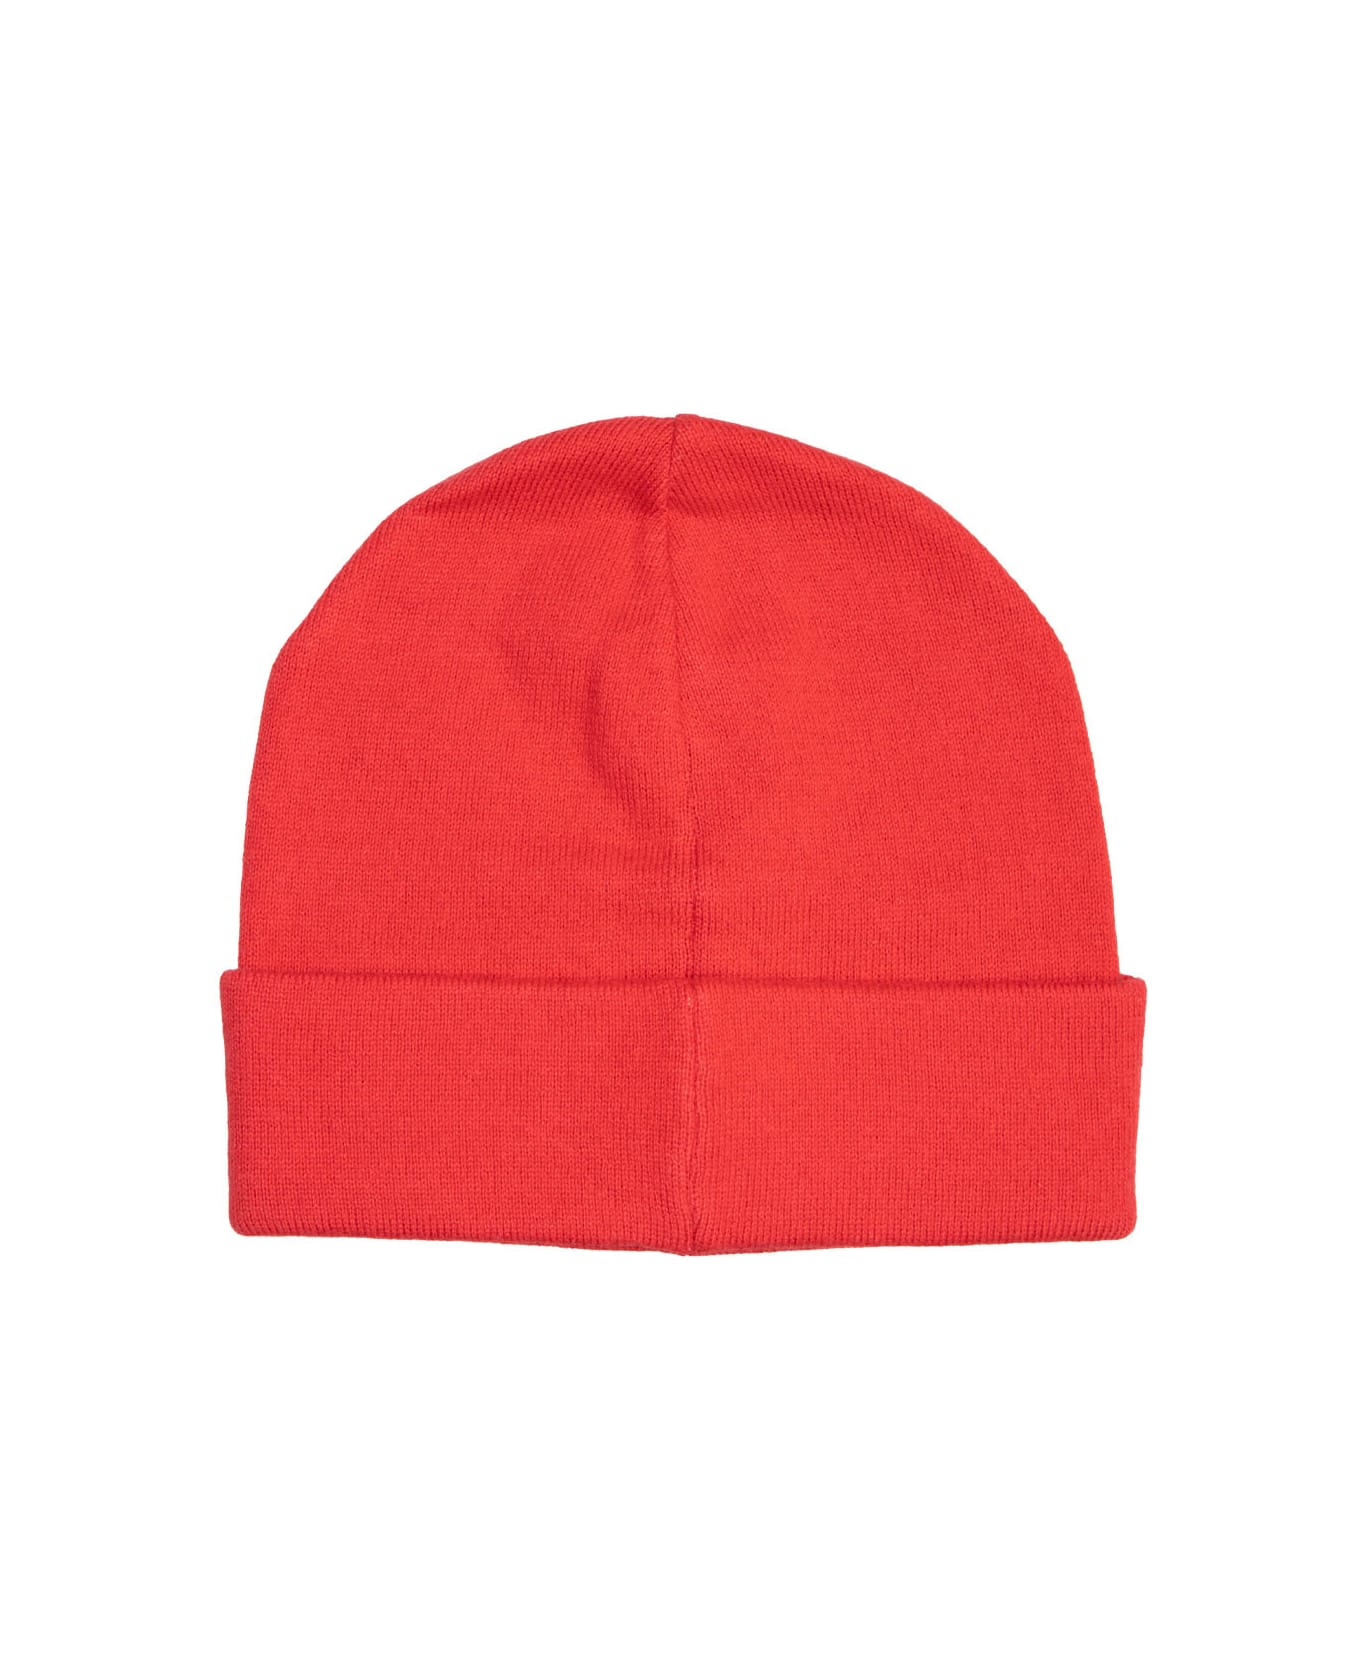 Givenchy Cotton And Cashmere Hat - Red アクセサリー＆ギフト